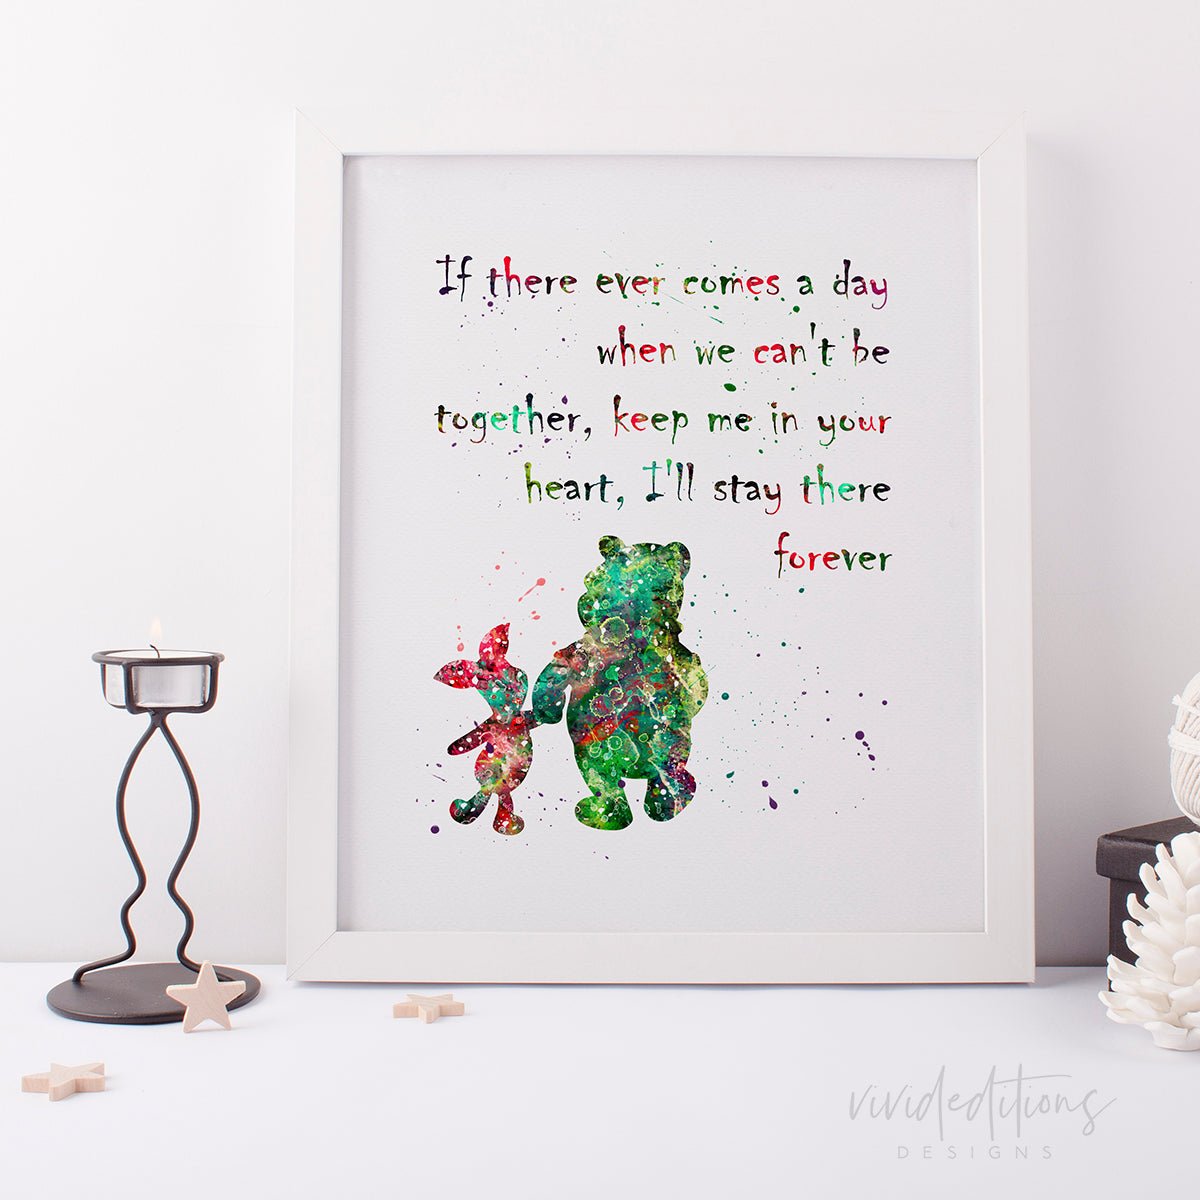 Winnie the Pooh Quote 2 Watercolor Art Print Print - VividEditions